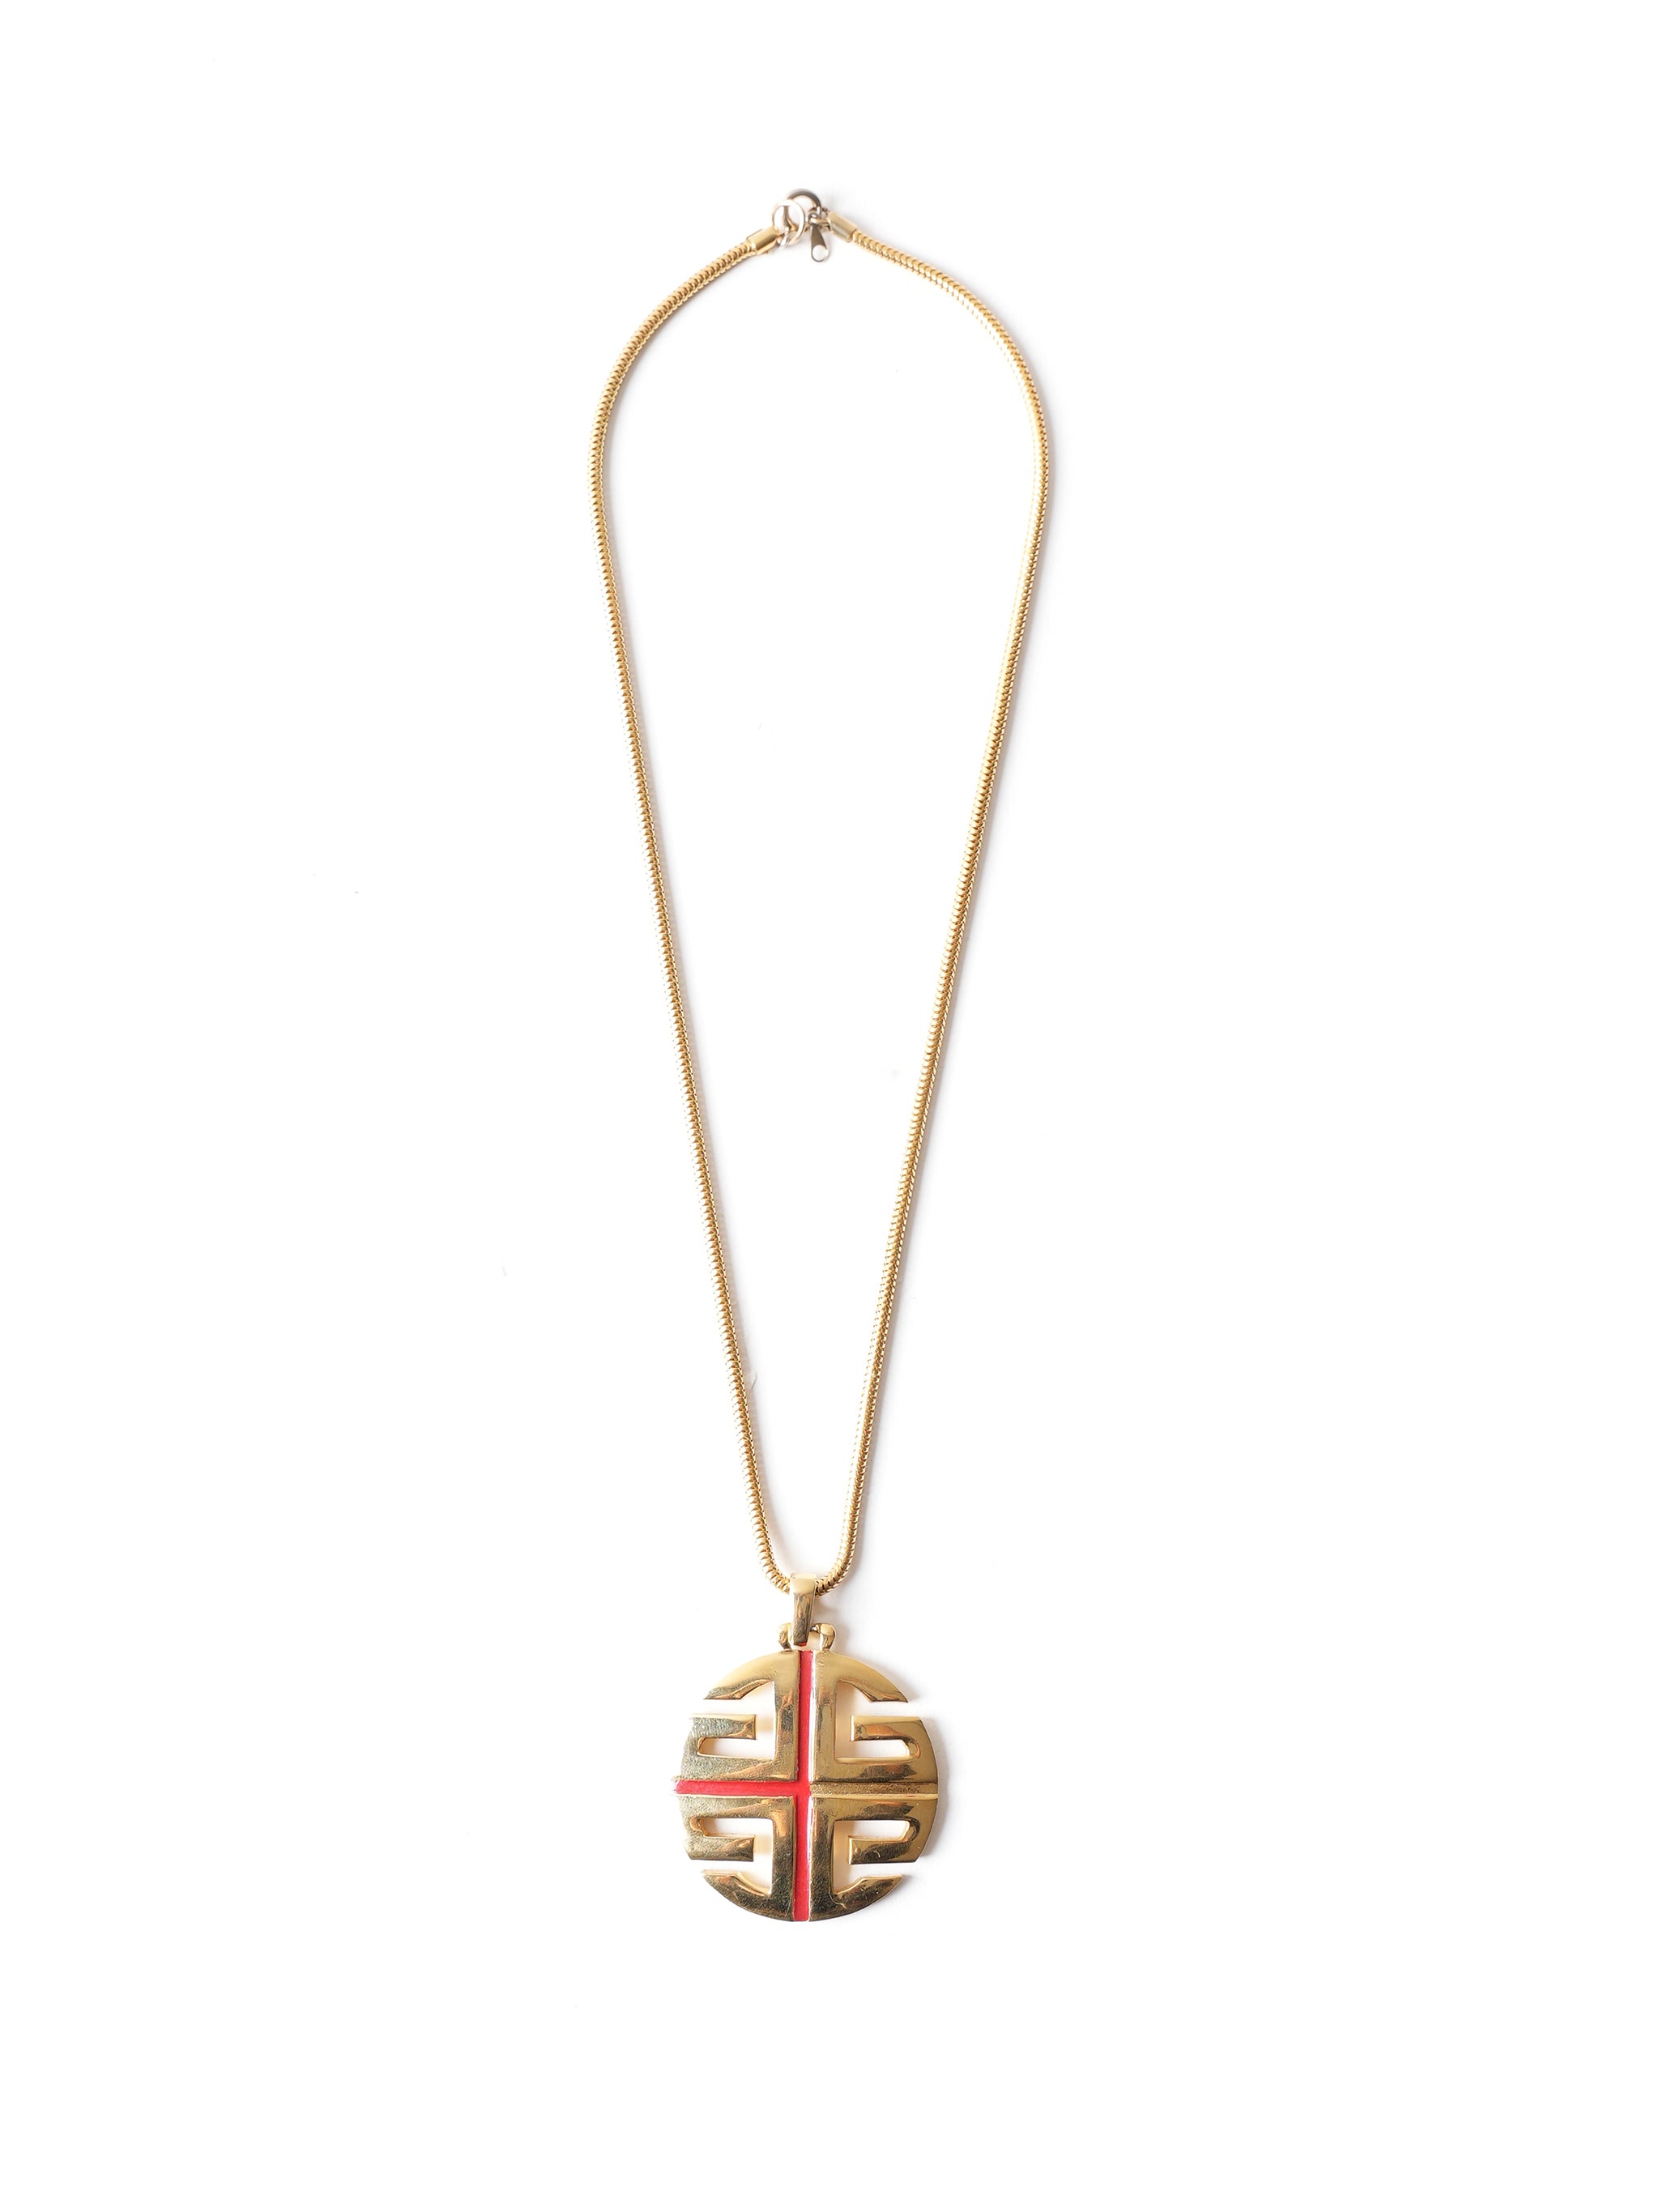 Givenchy Enamel & Gold Plated Necklace